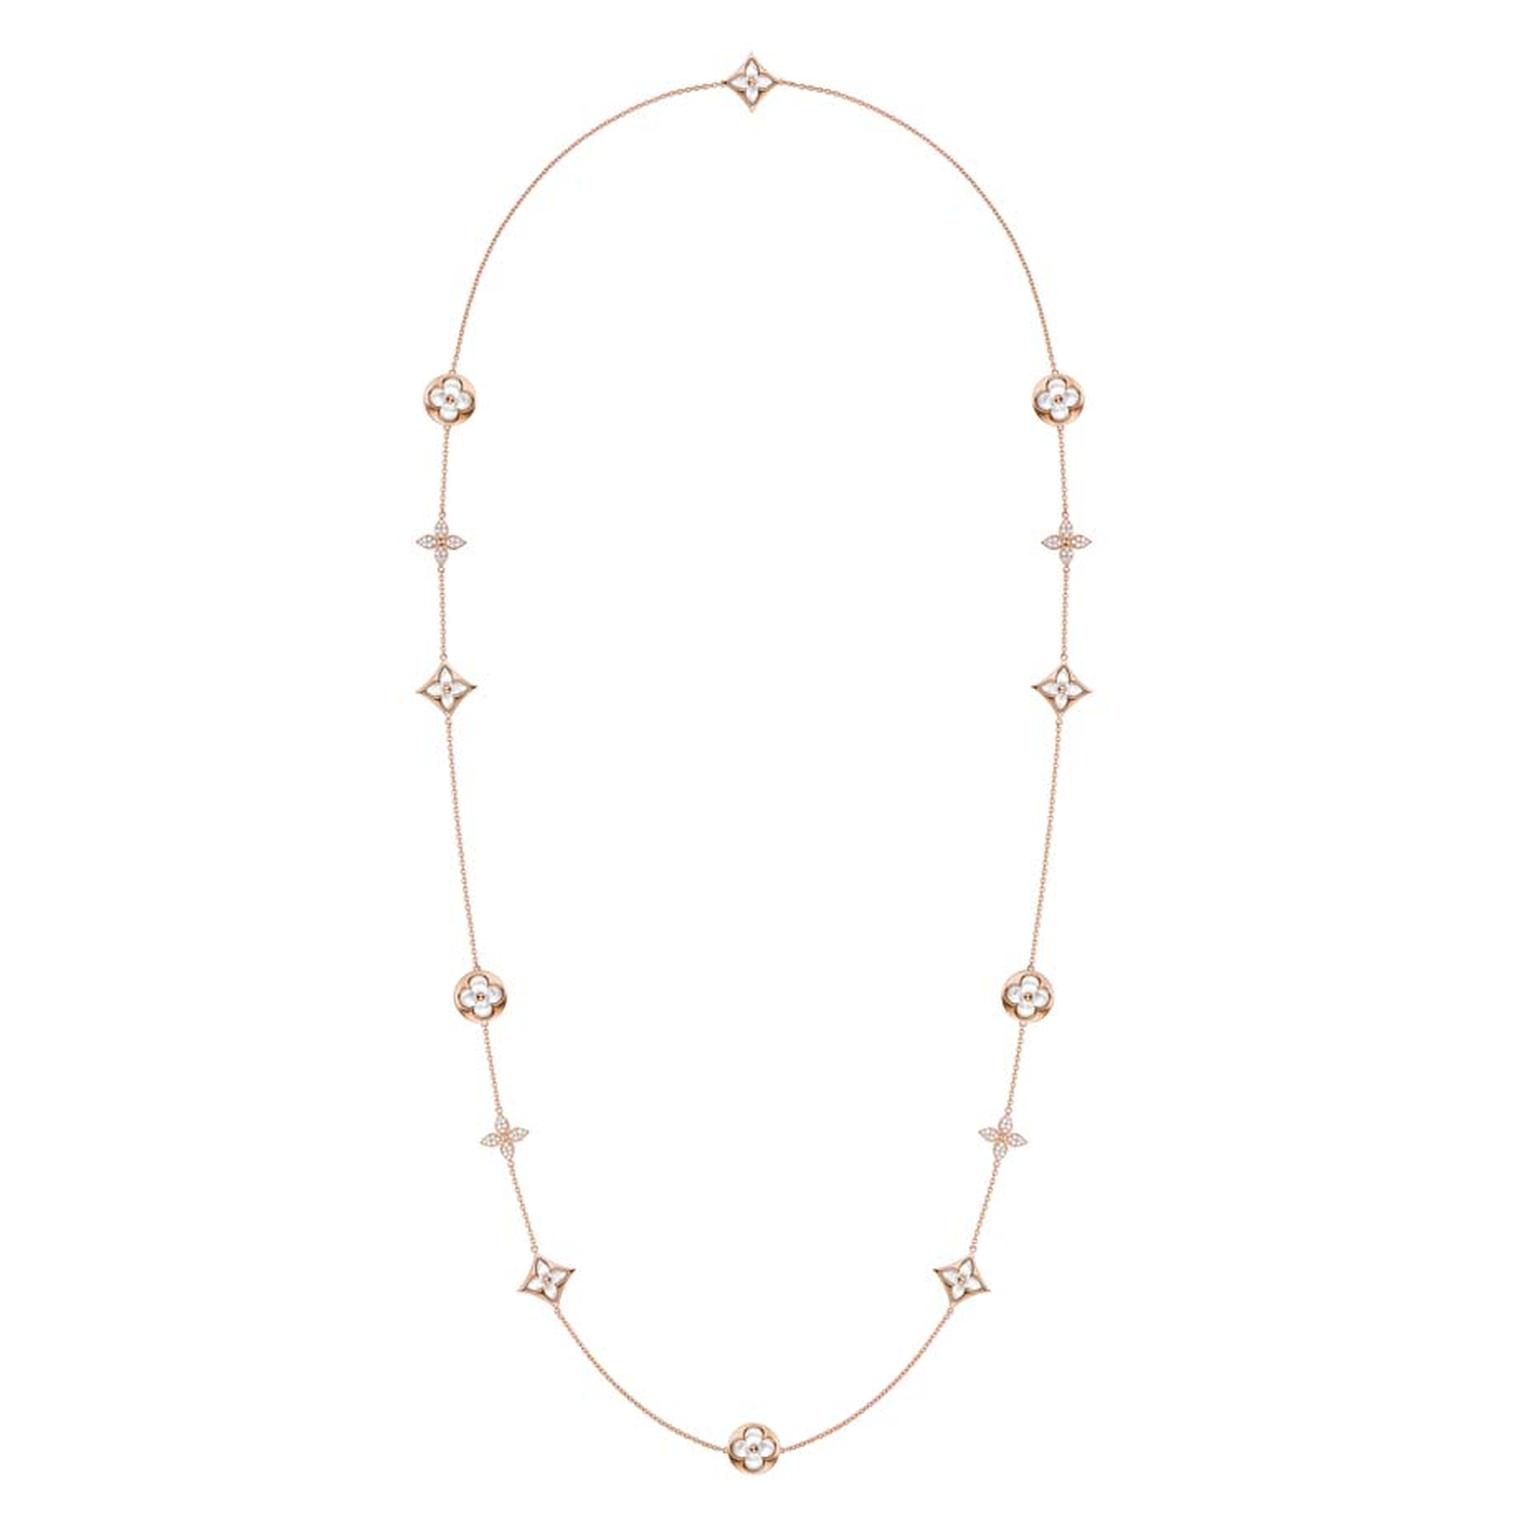 This it the first time Louis Vuitton jewellery has used mother-of-pearl in its Monogram collection, but since Vuitton prides itself on doing things its own way, the mother-of-pearl is facetted into a gently rounded cabochon shape. This adds extra depth an